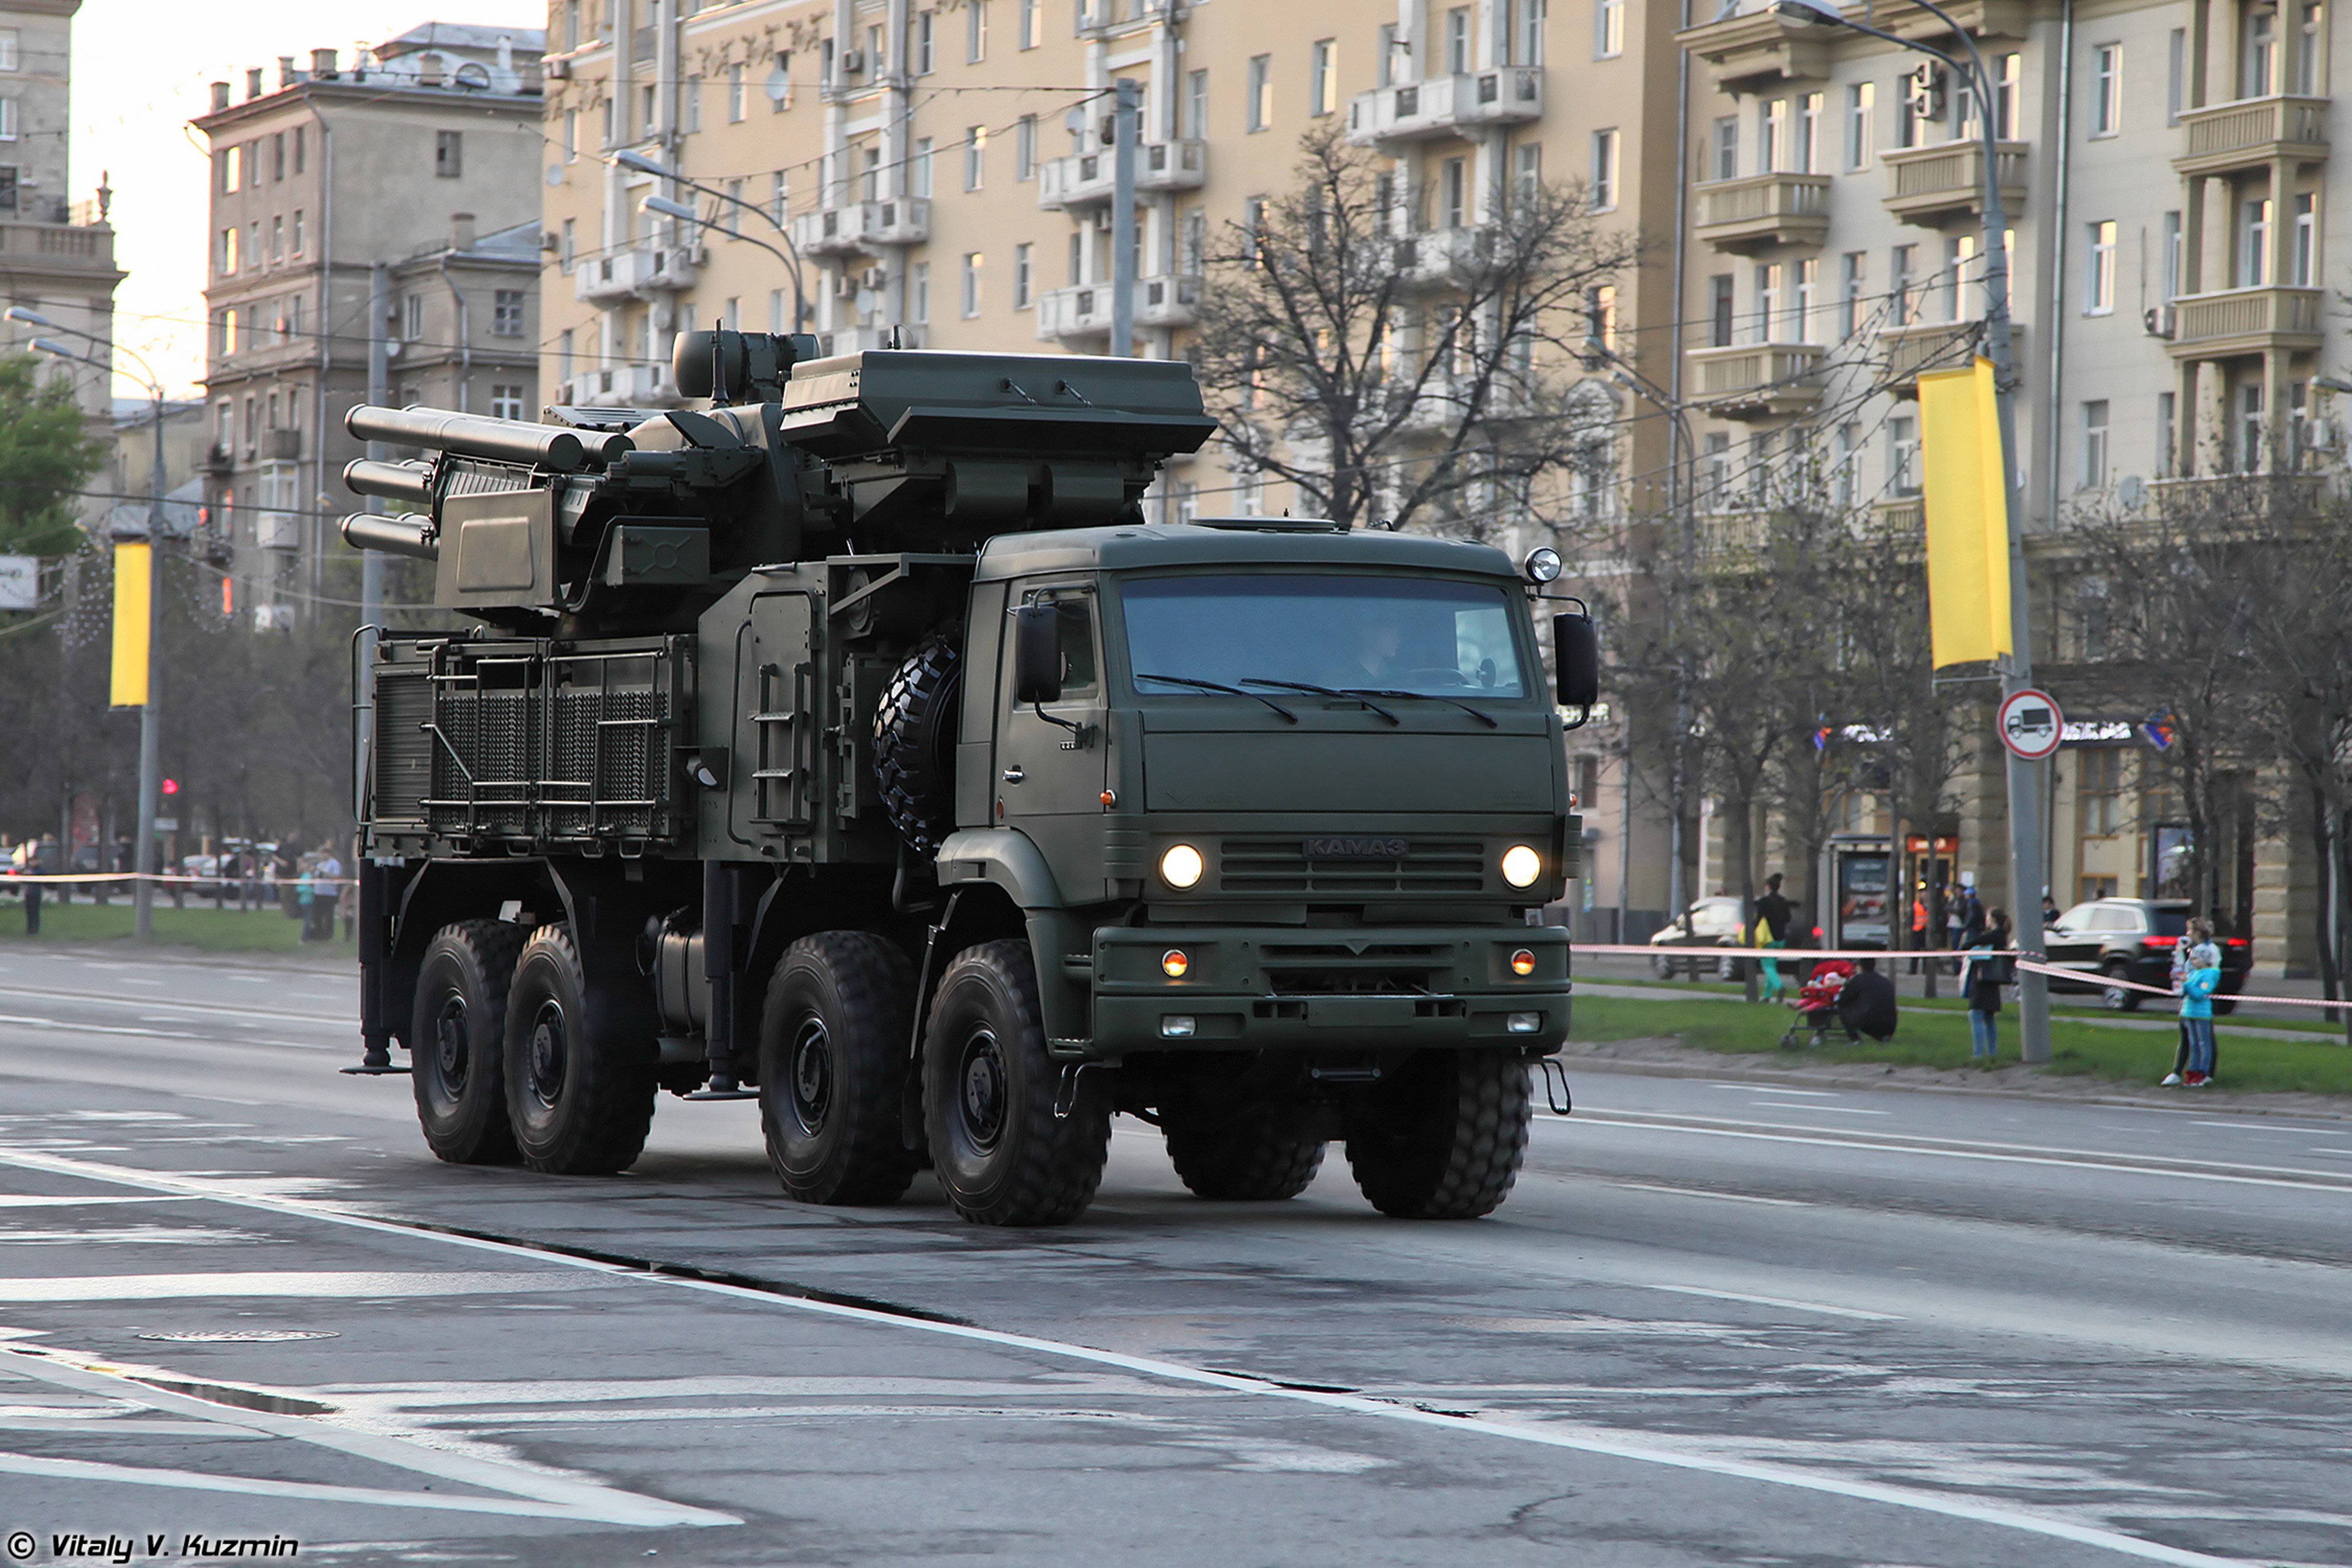 april 29th, Rehearsal, Of, 2014, Victory, Day, Parade, In, Moscow, Russia, Red, Star, Russian, Military, Army, 96k6, Pantsir s1, Telar, Anti aircraft, Missile, Kamaz, Truck, 4000x2667 Wallpaper